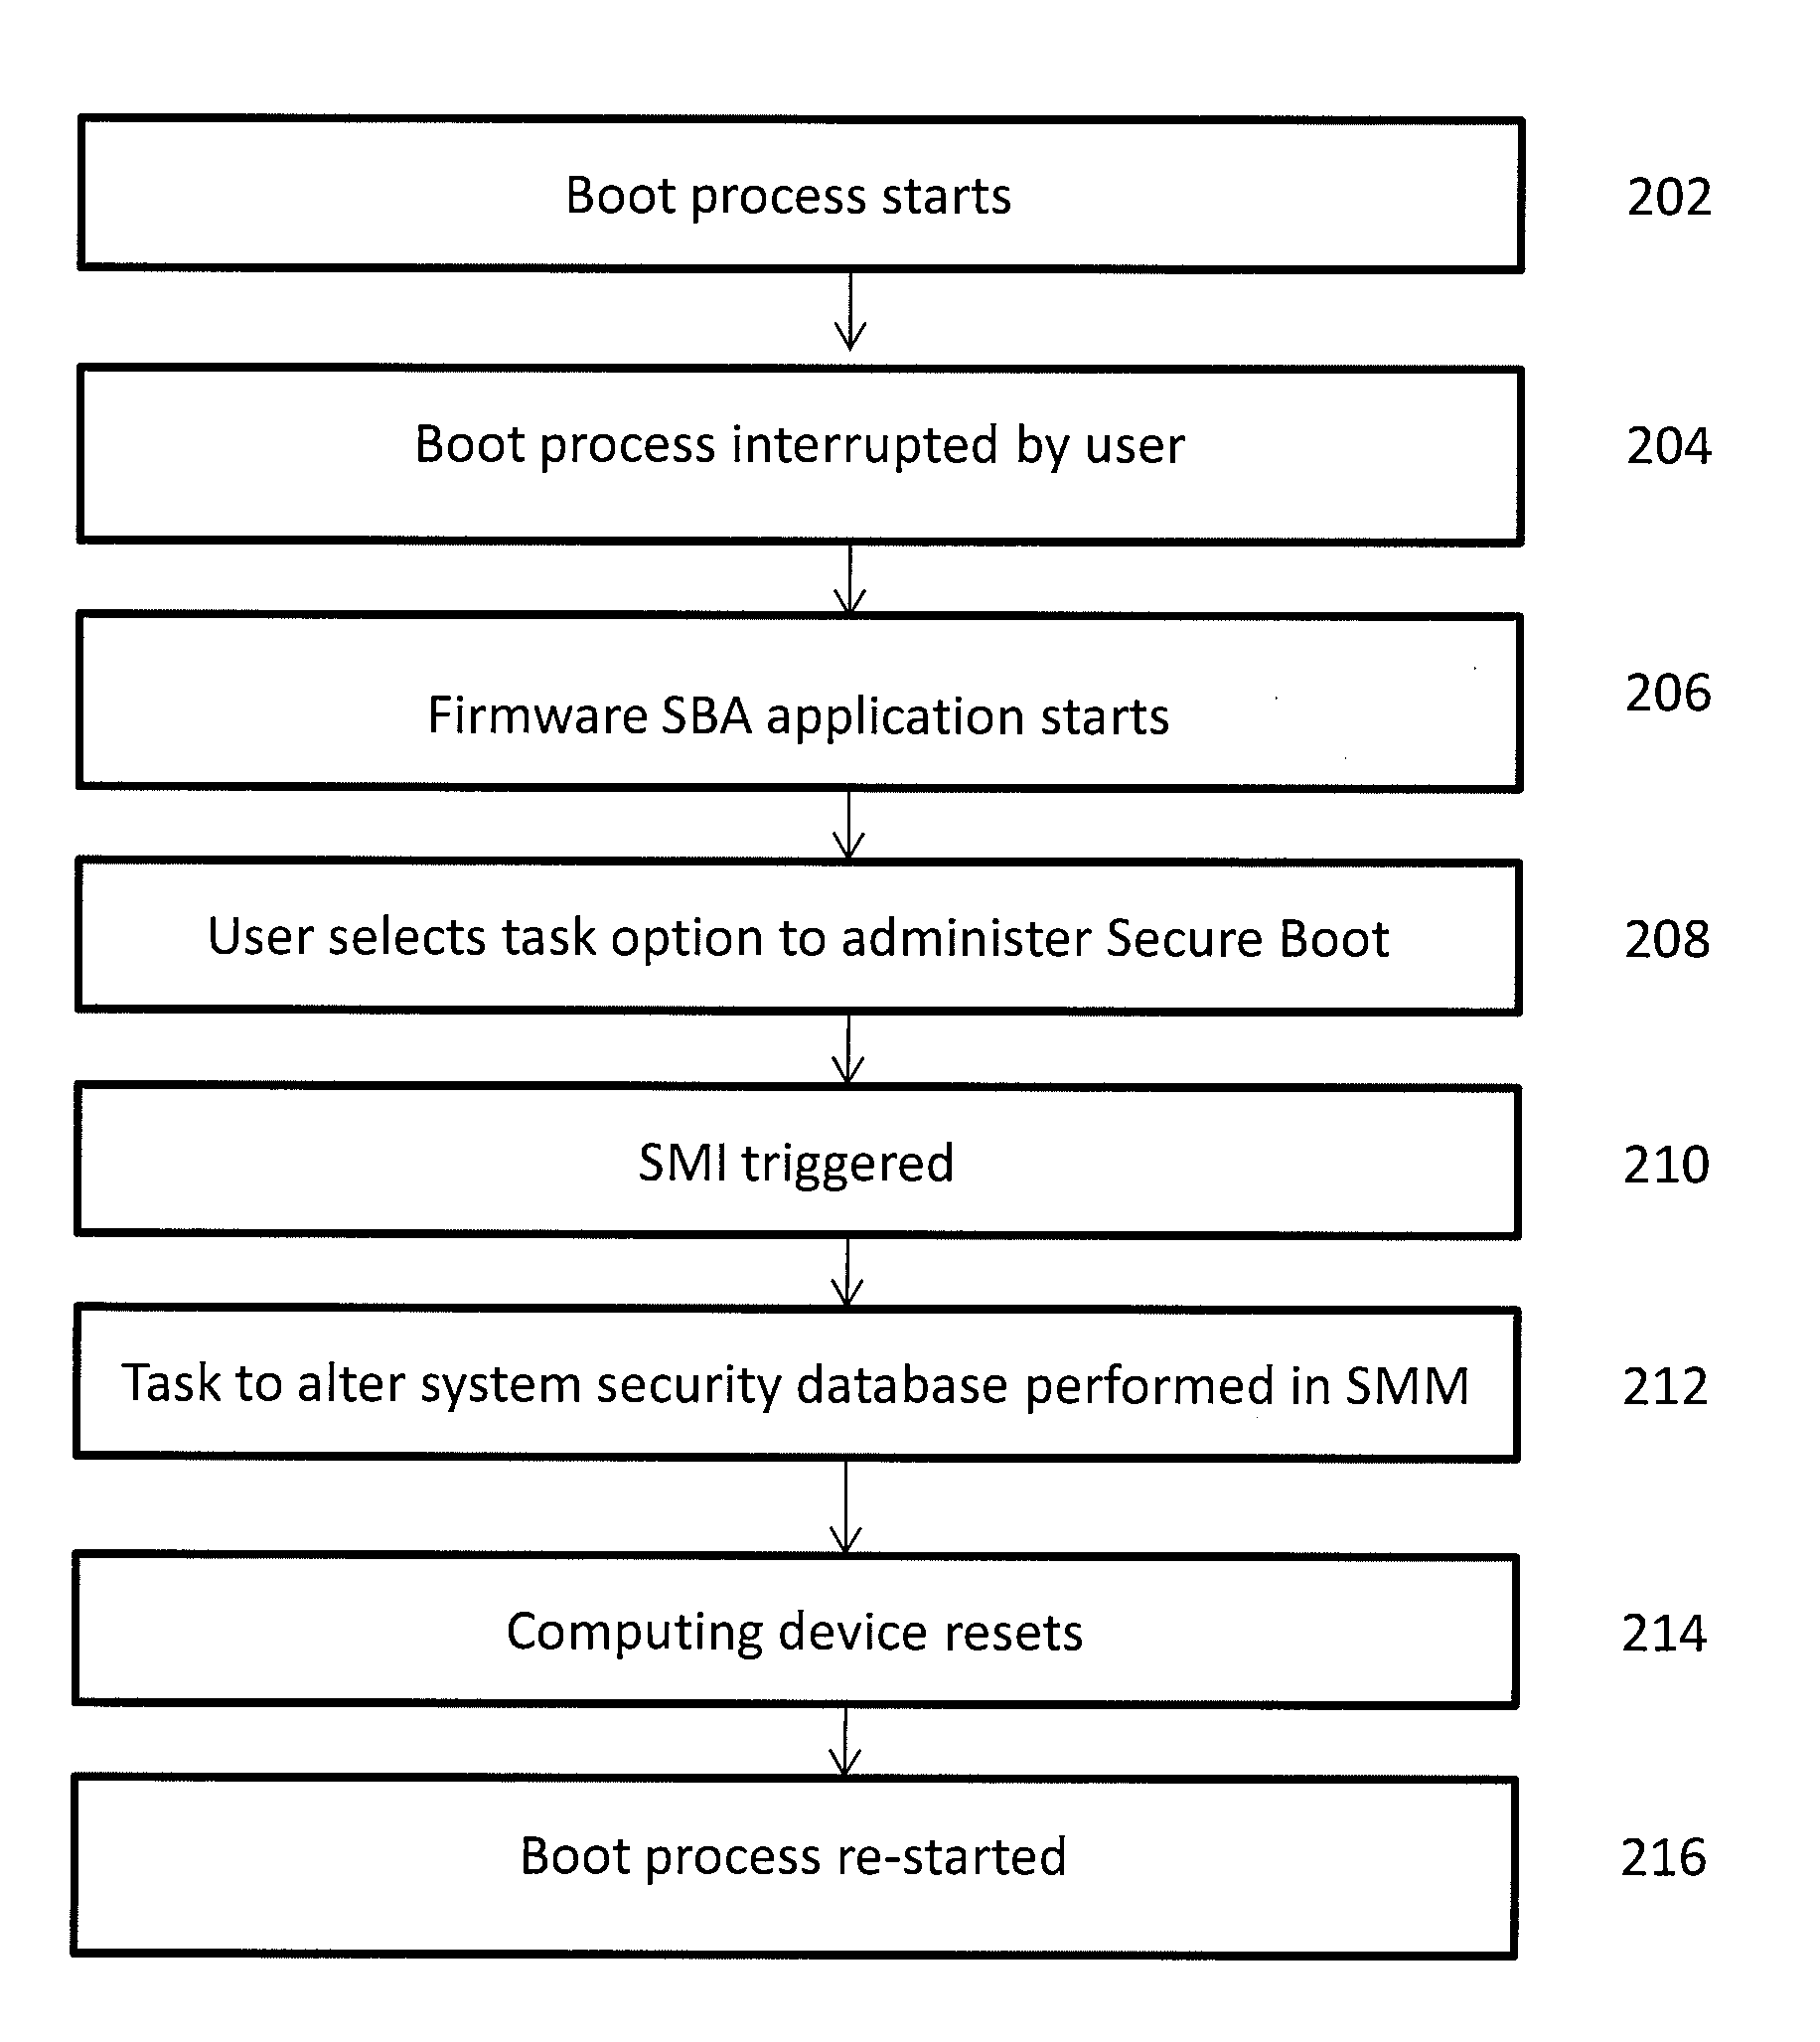 Secure boot administration in a unified extensible firmware interface (UEFI)-compliant computing device